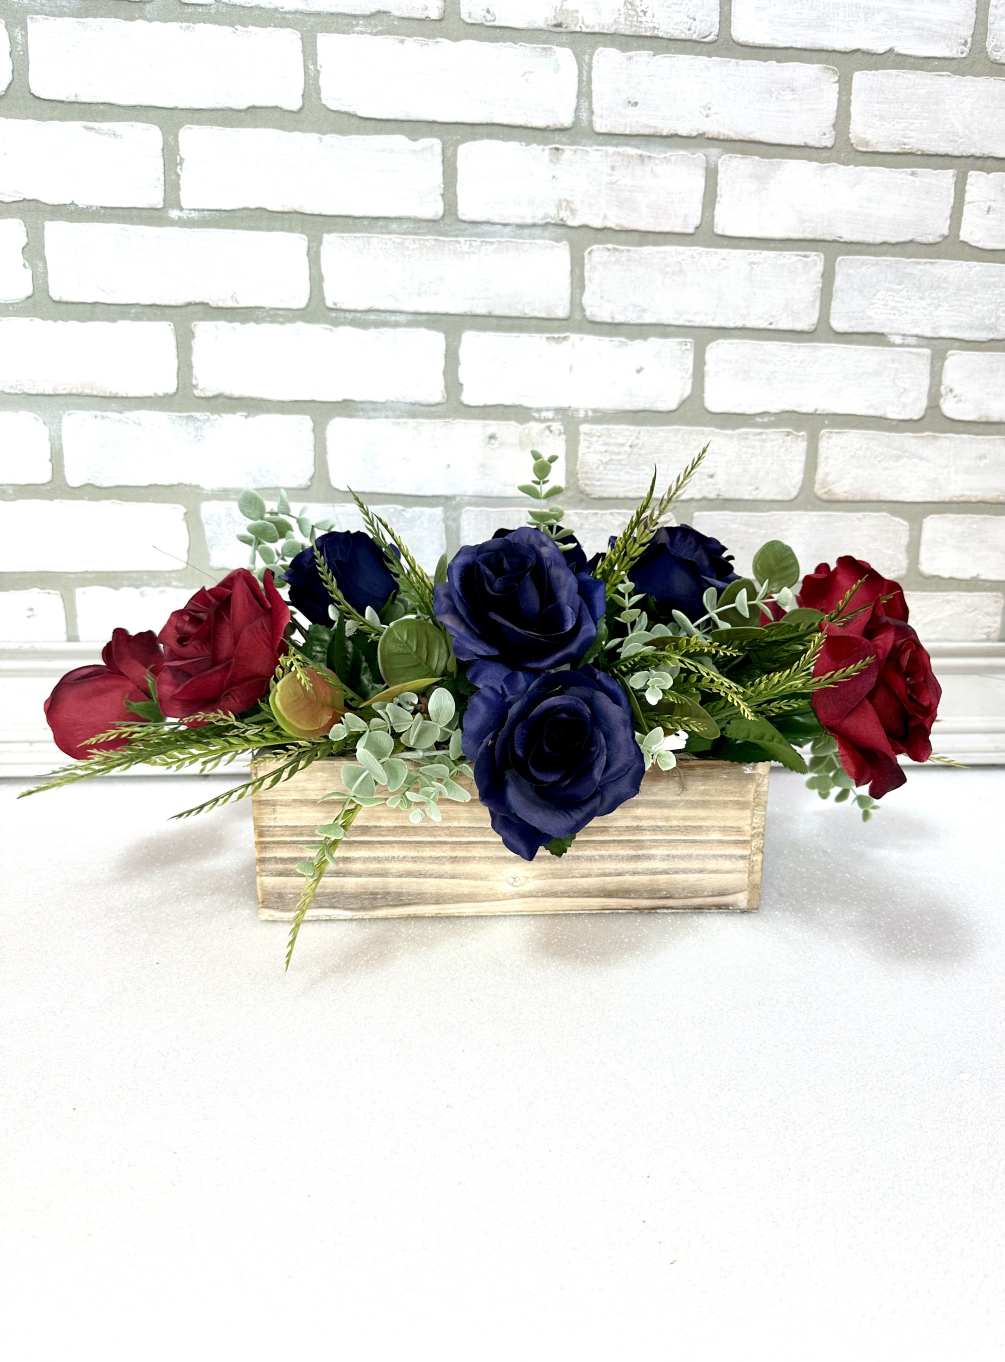 A wooden box arranged with artificial navy blue &amp; burgundy roses, and